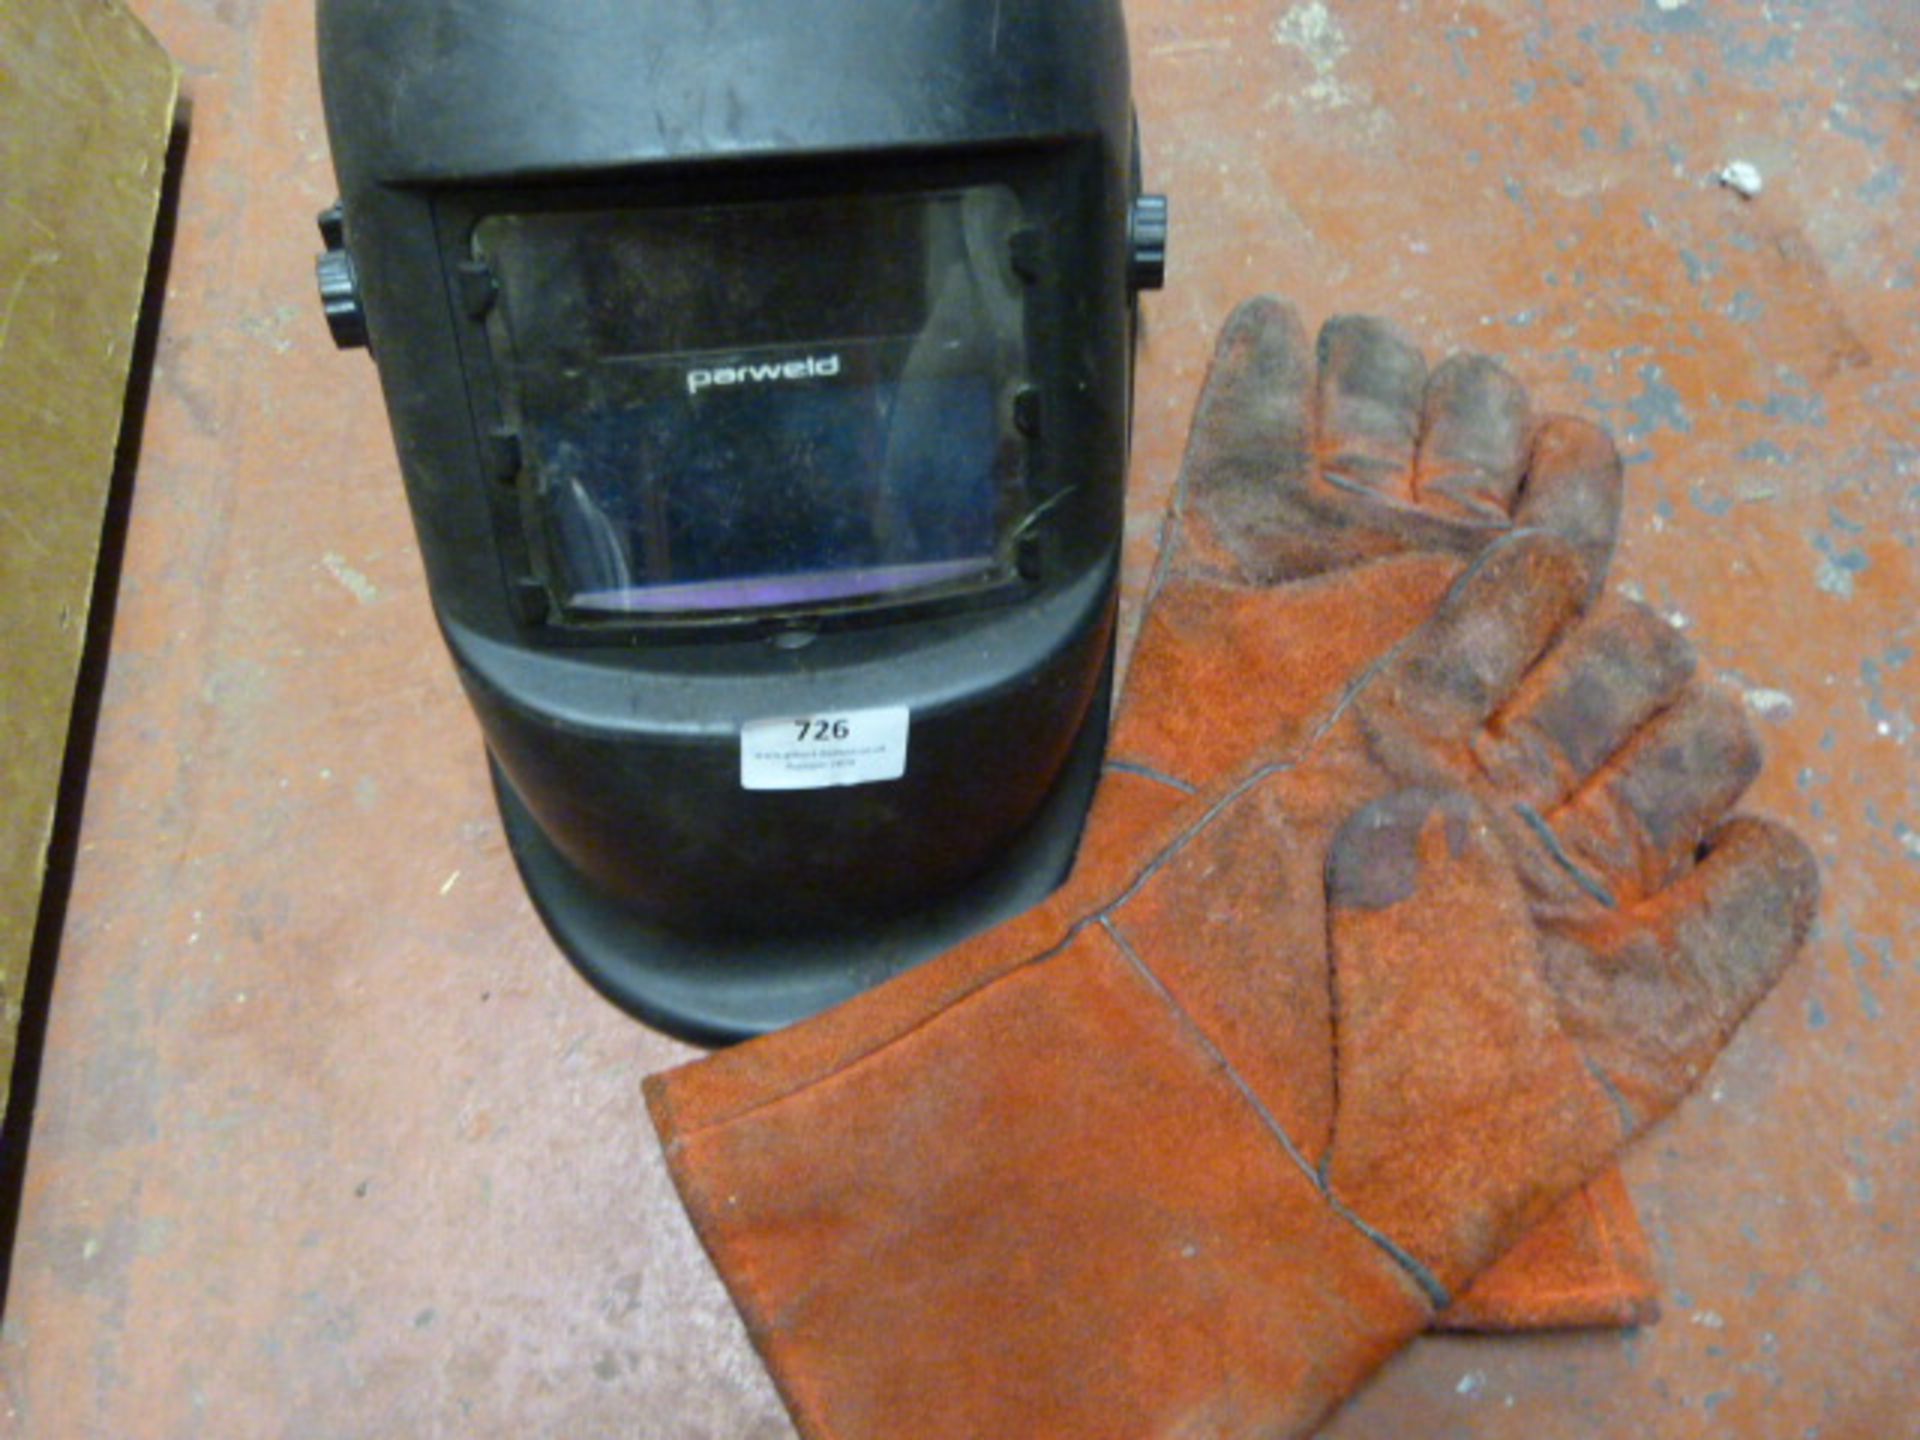 Welding Mask and Gloves